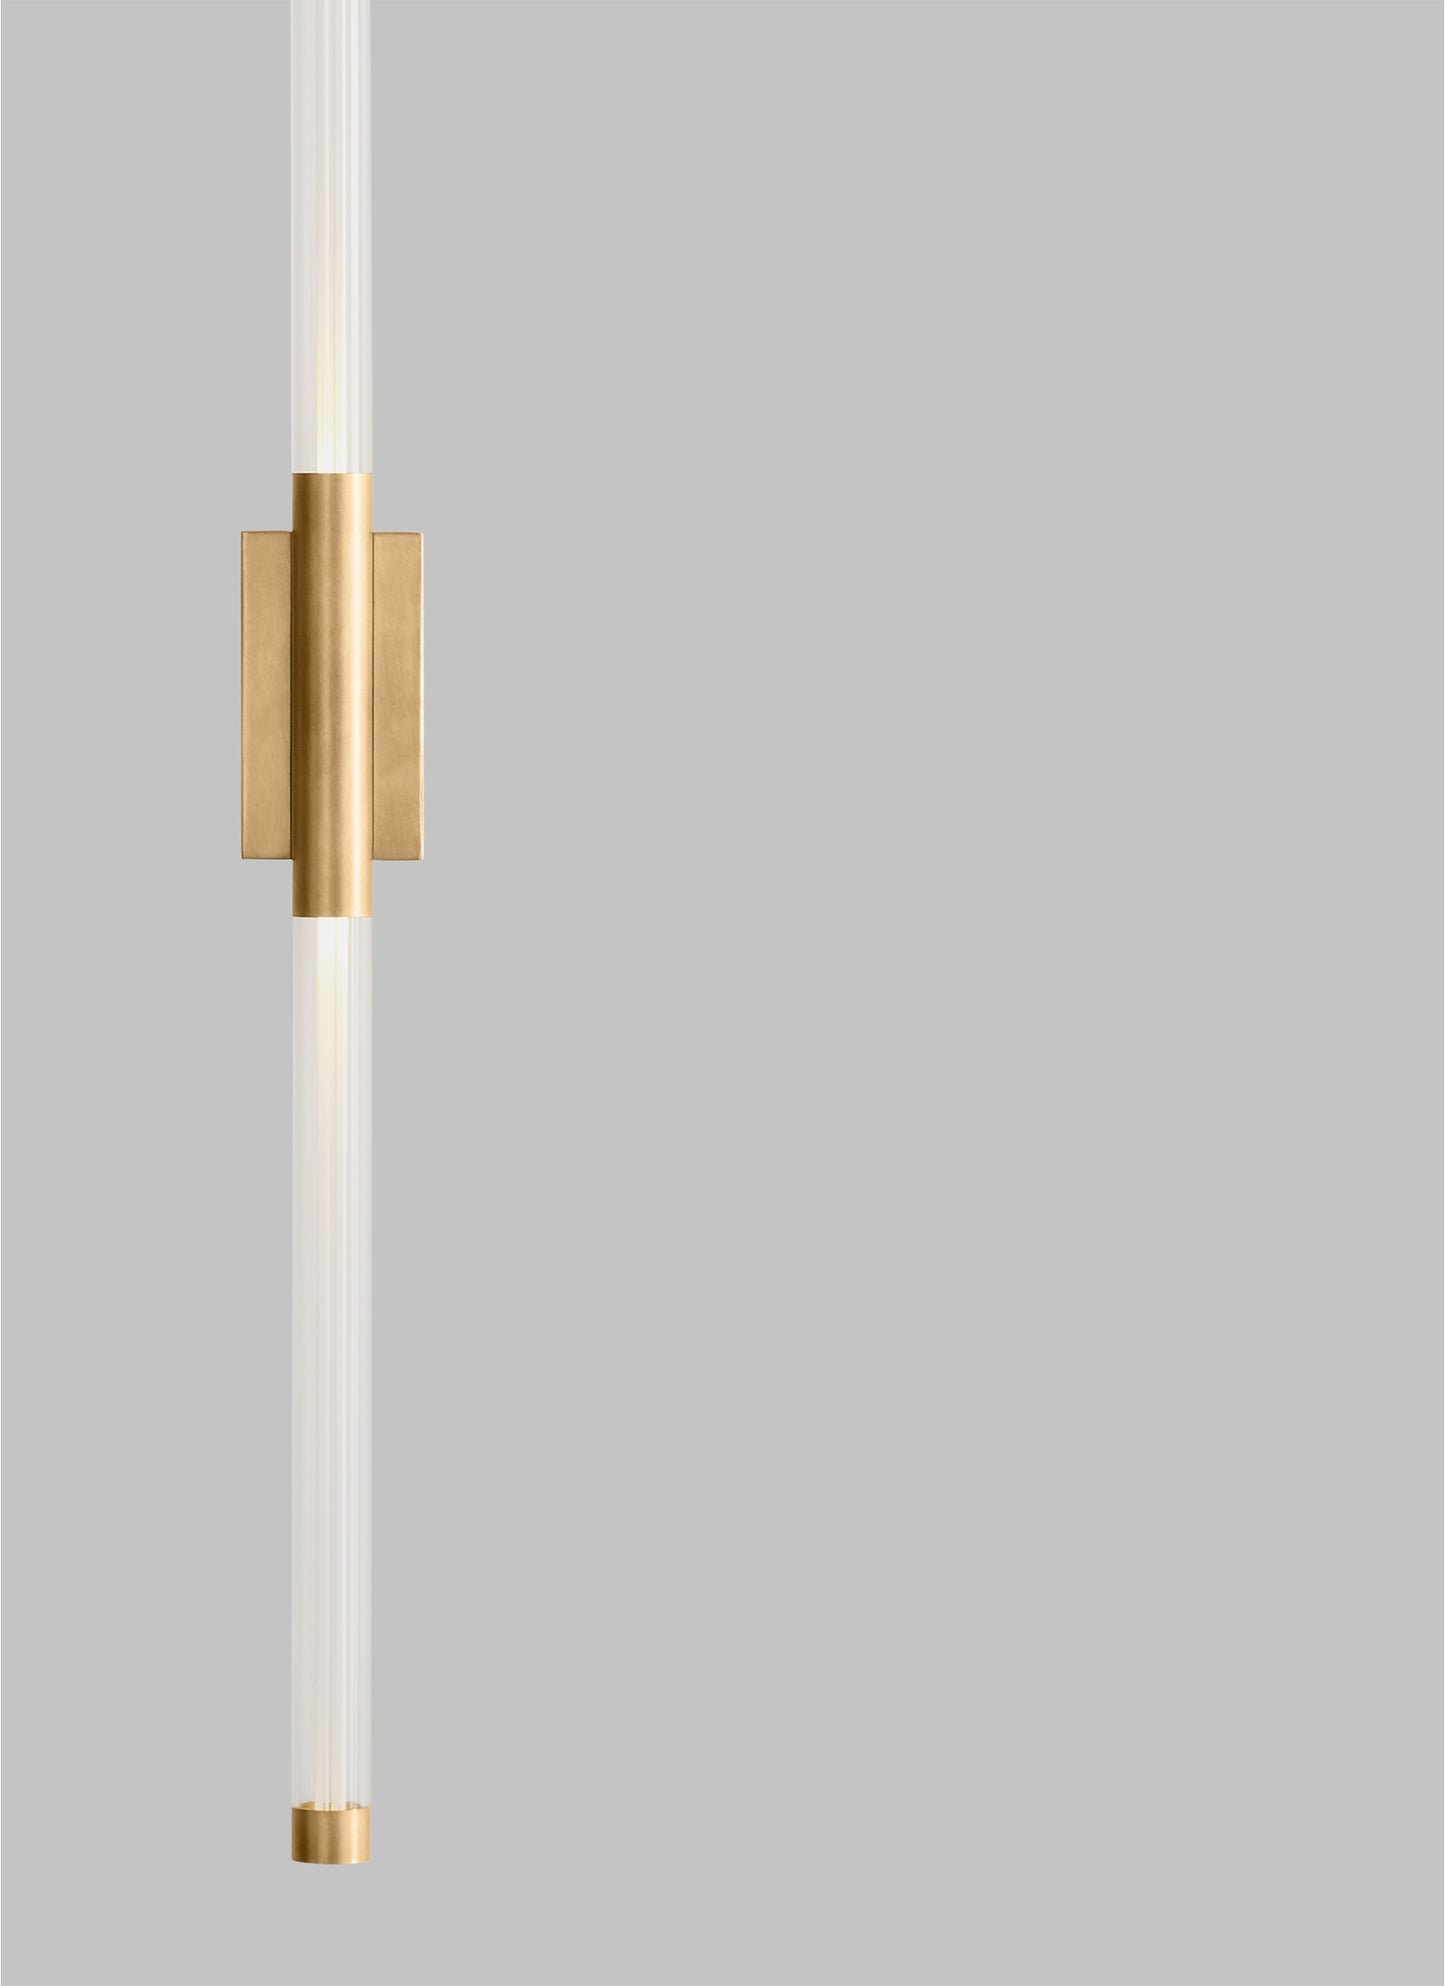 Phobos Wall Sconce - Stylish Lighting for Contemporary Spaces